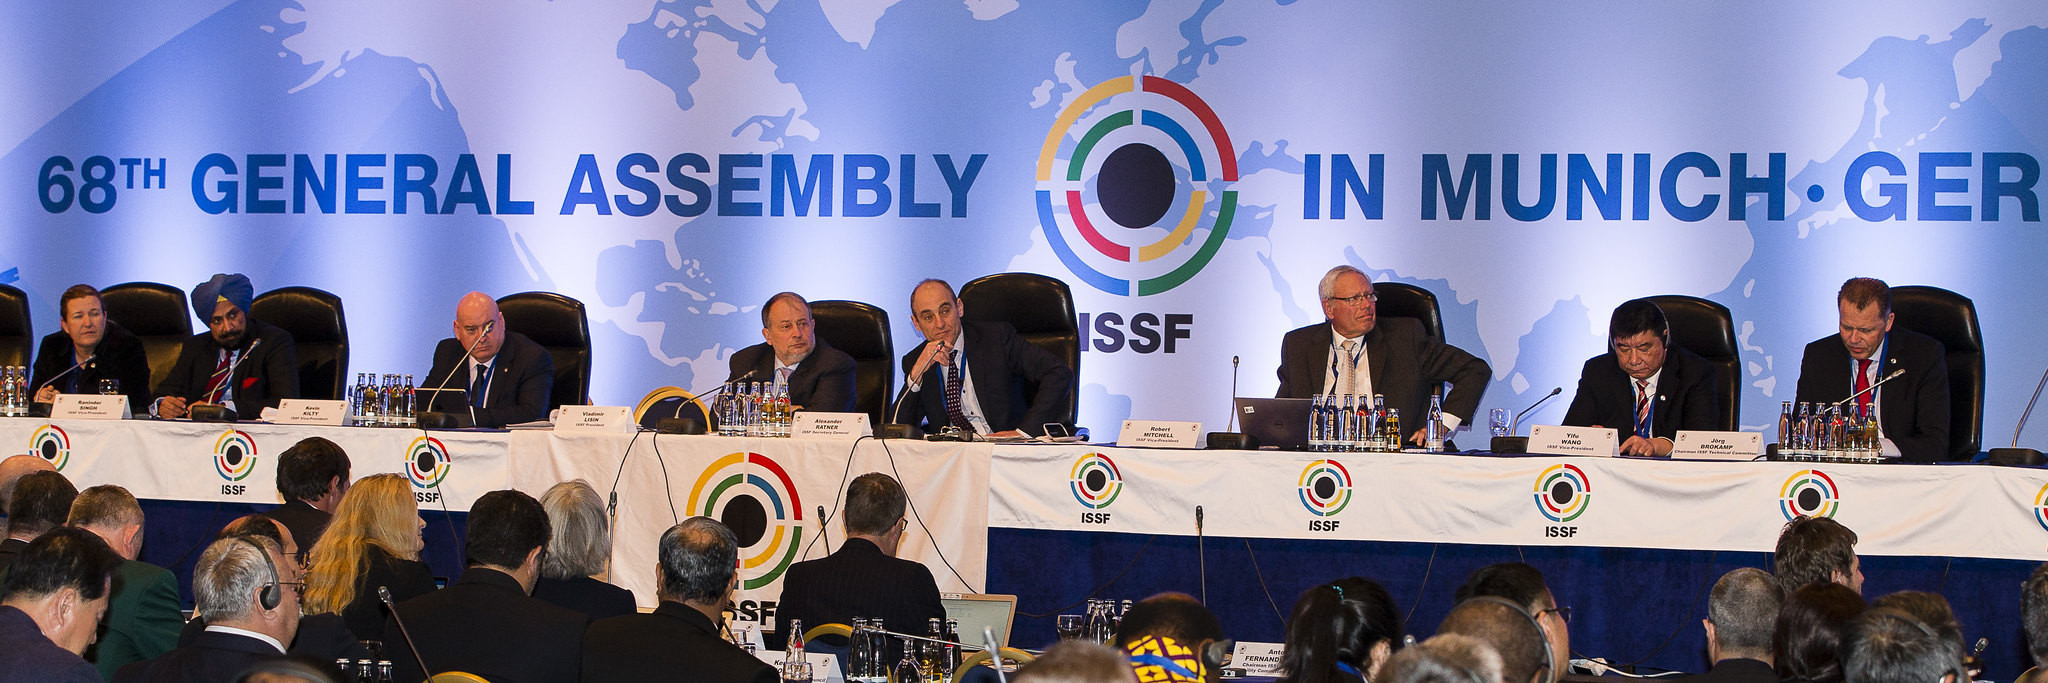 The Extraordinary General Assembly is set to take place in Munich ©ISSF